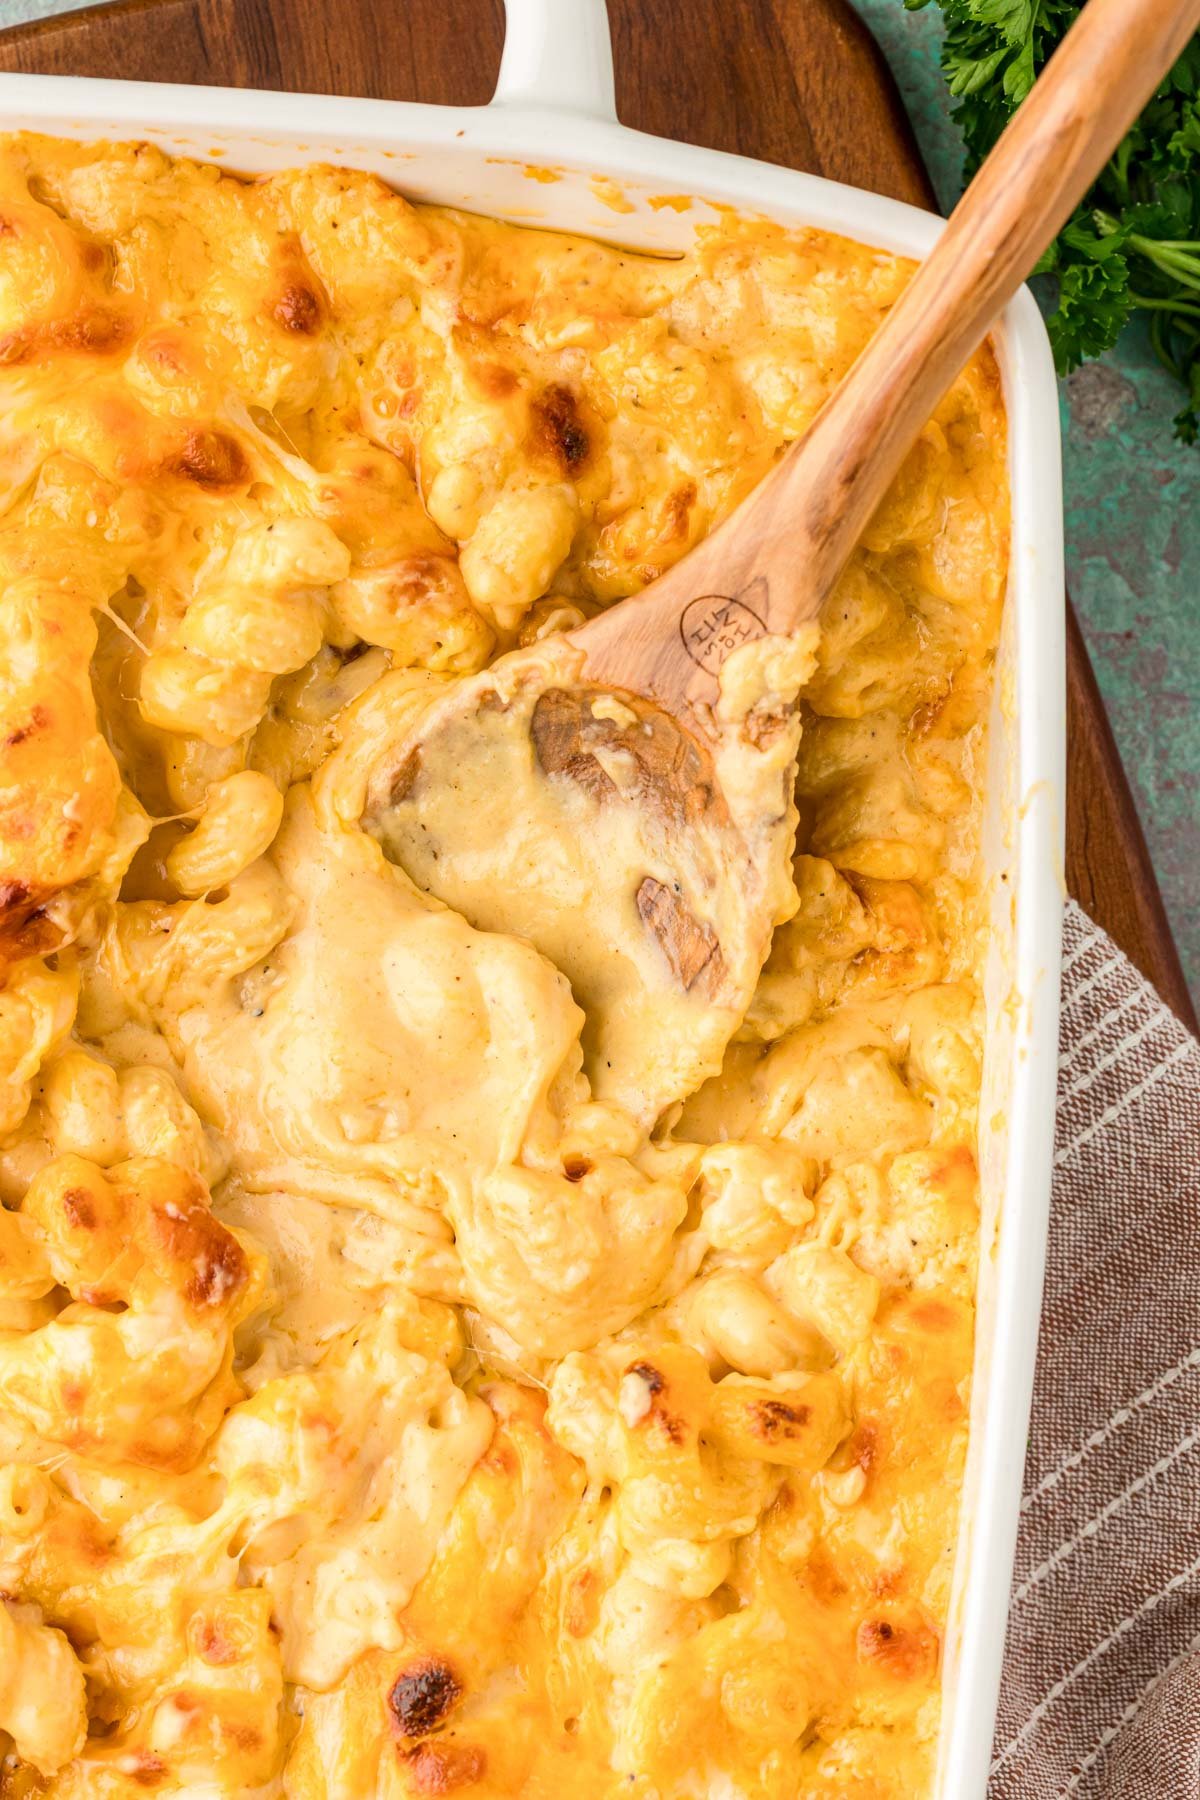 Overhead of a wooden spoon scooping mac and cheese out of a casserole dish.